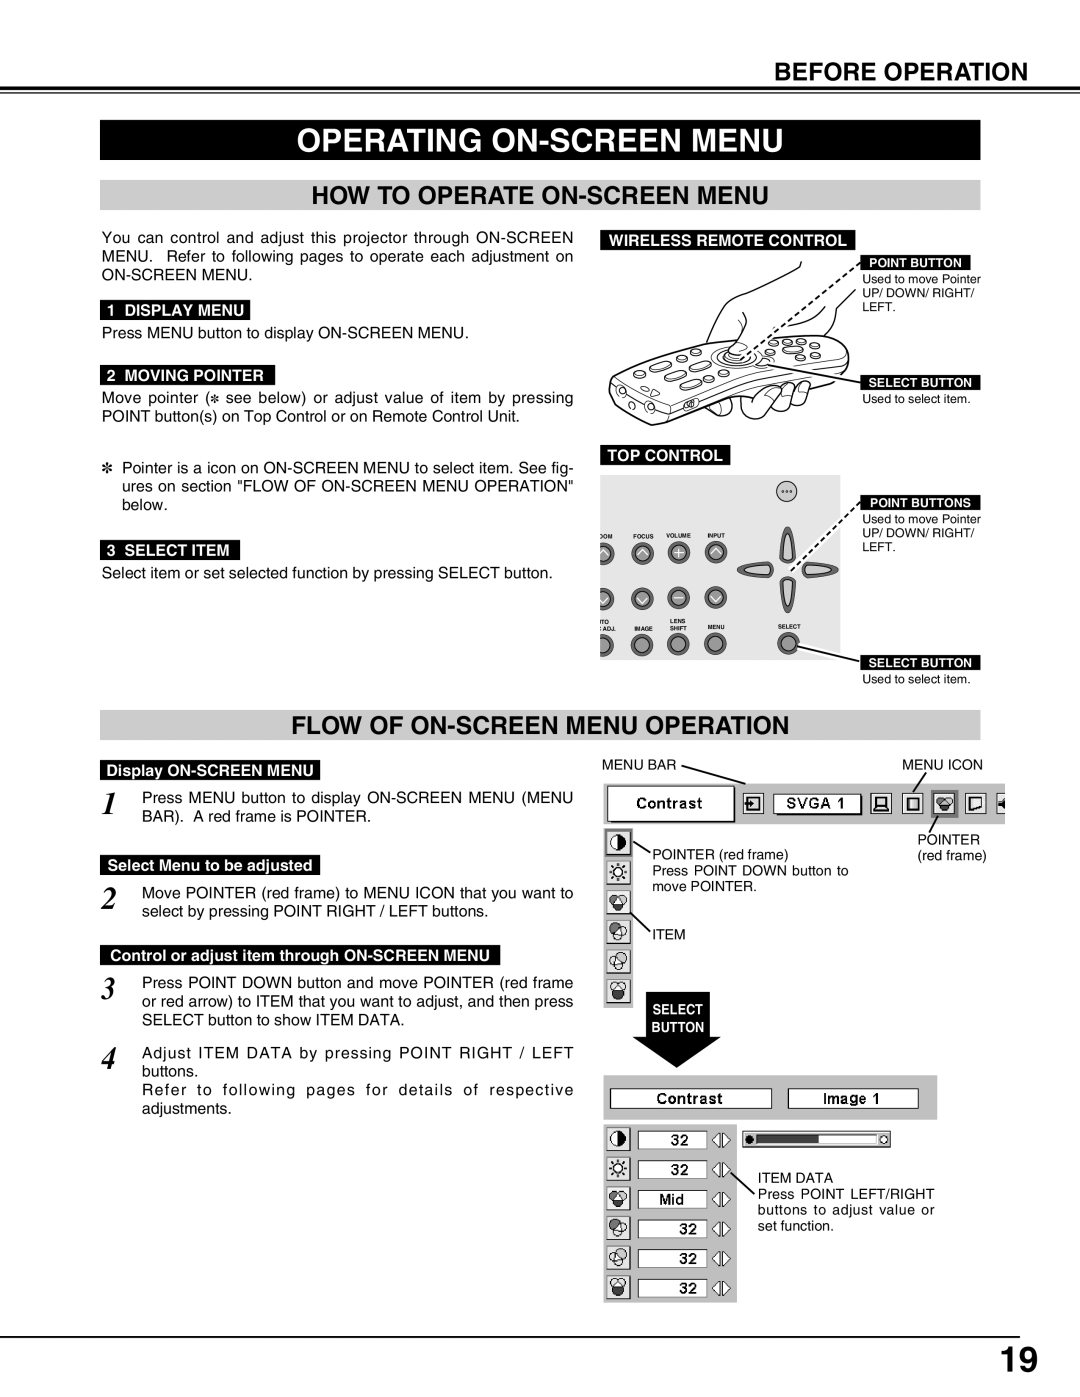 Christie Digital Systems 38-MX2001-01 user manual Operating On-Screen Menu, How To Operate On-Screen Menu, Before Operation 